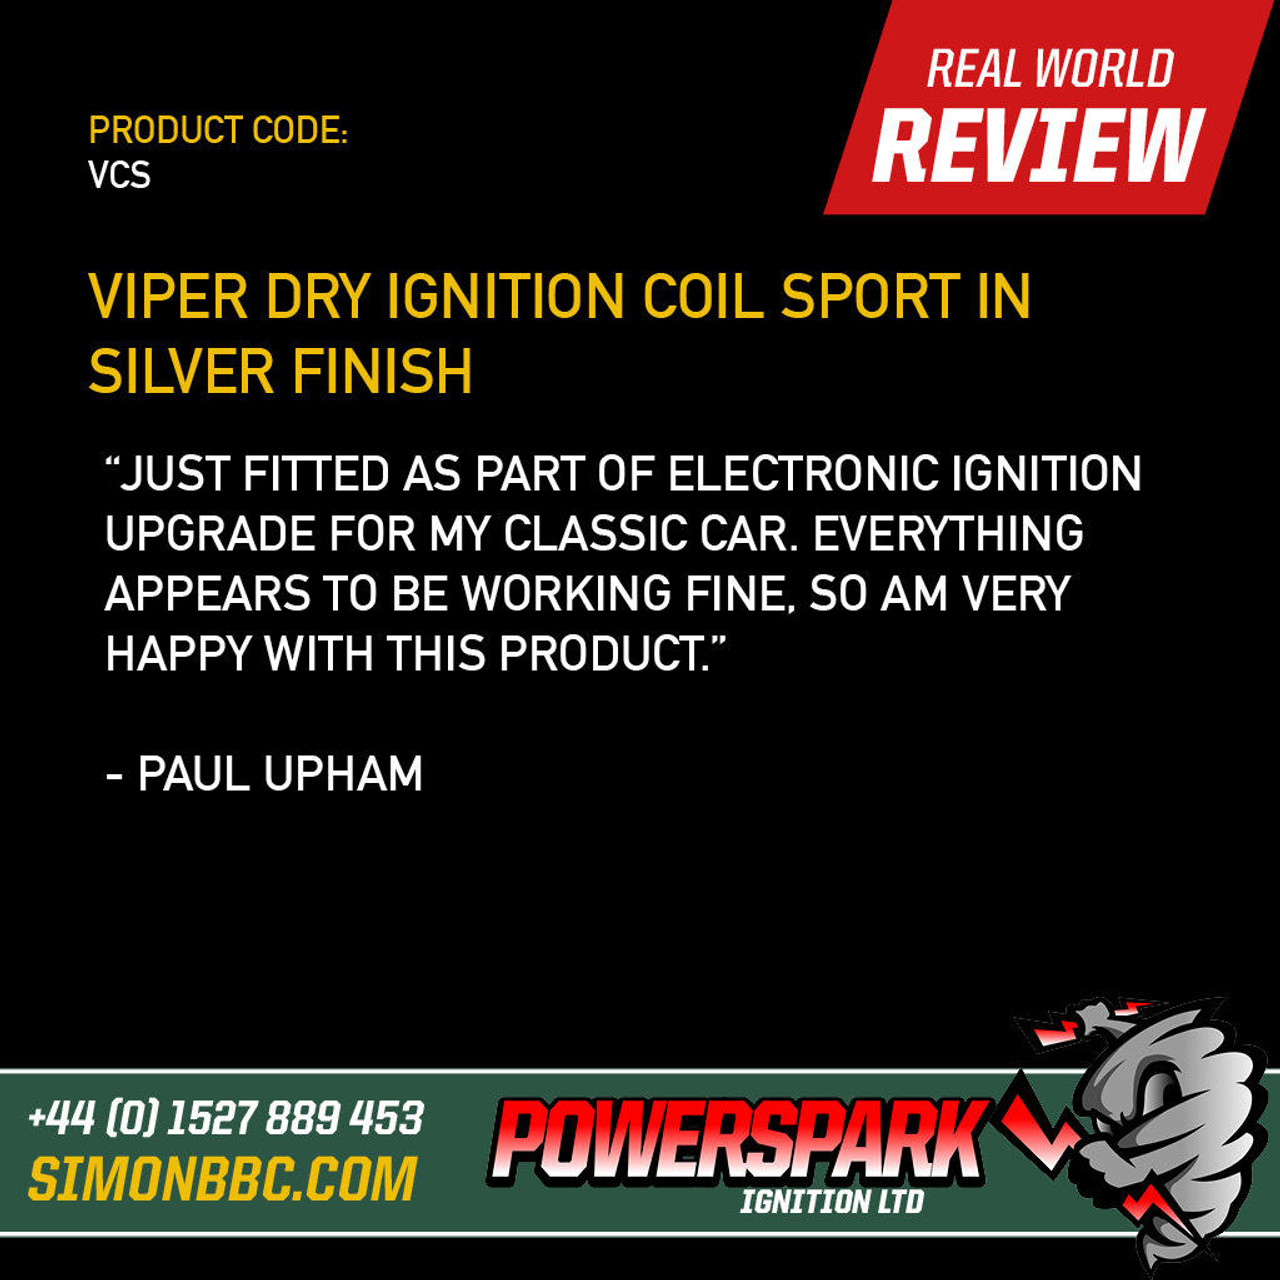 Viper Dry Sports Ignition Coil replaces DLB105